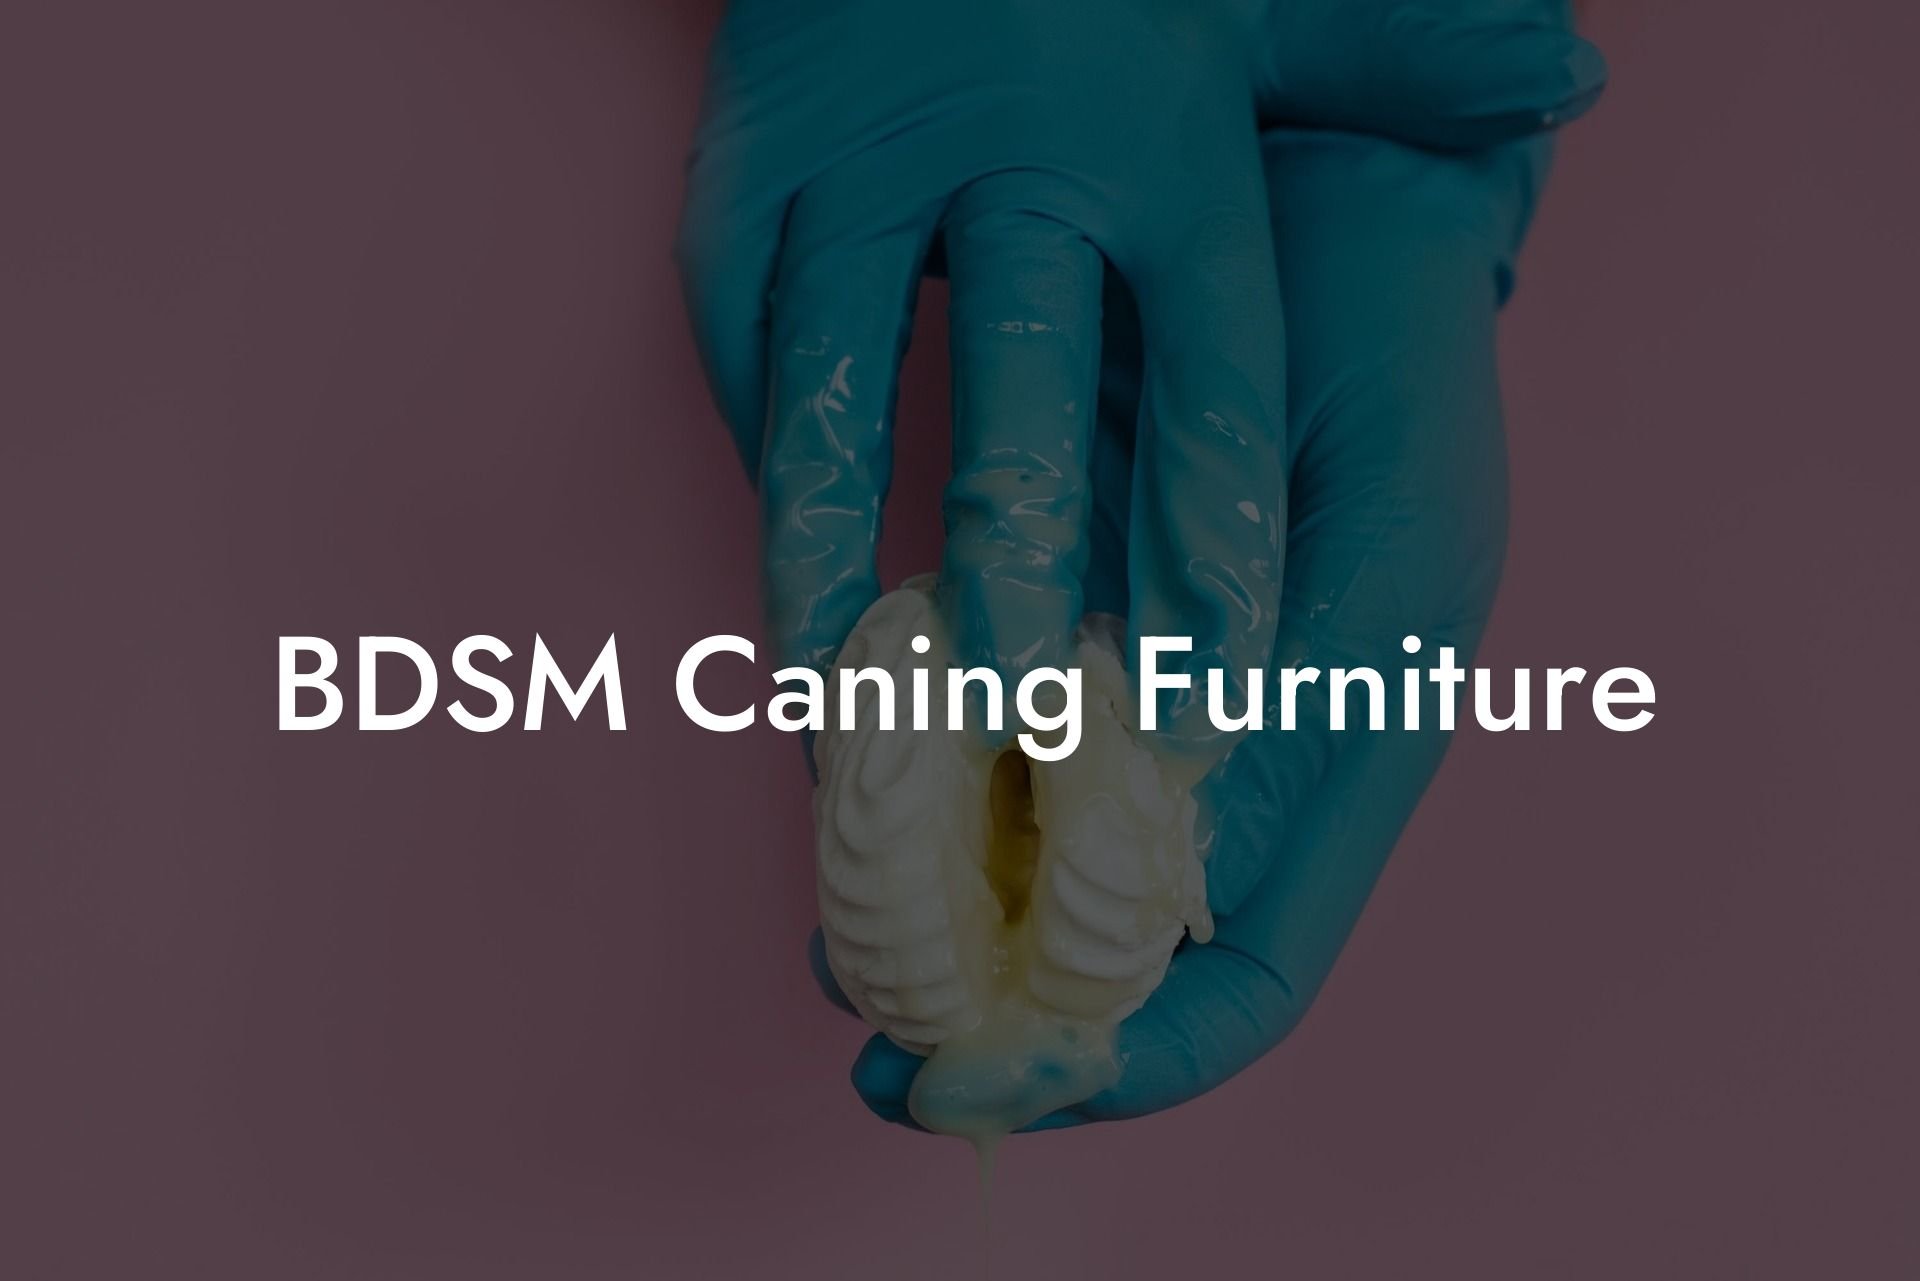 BDSM Caning Furniture